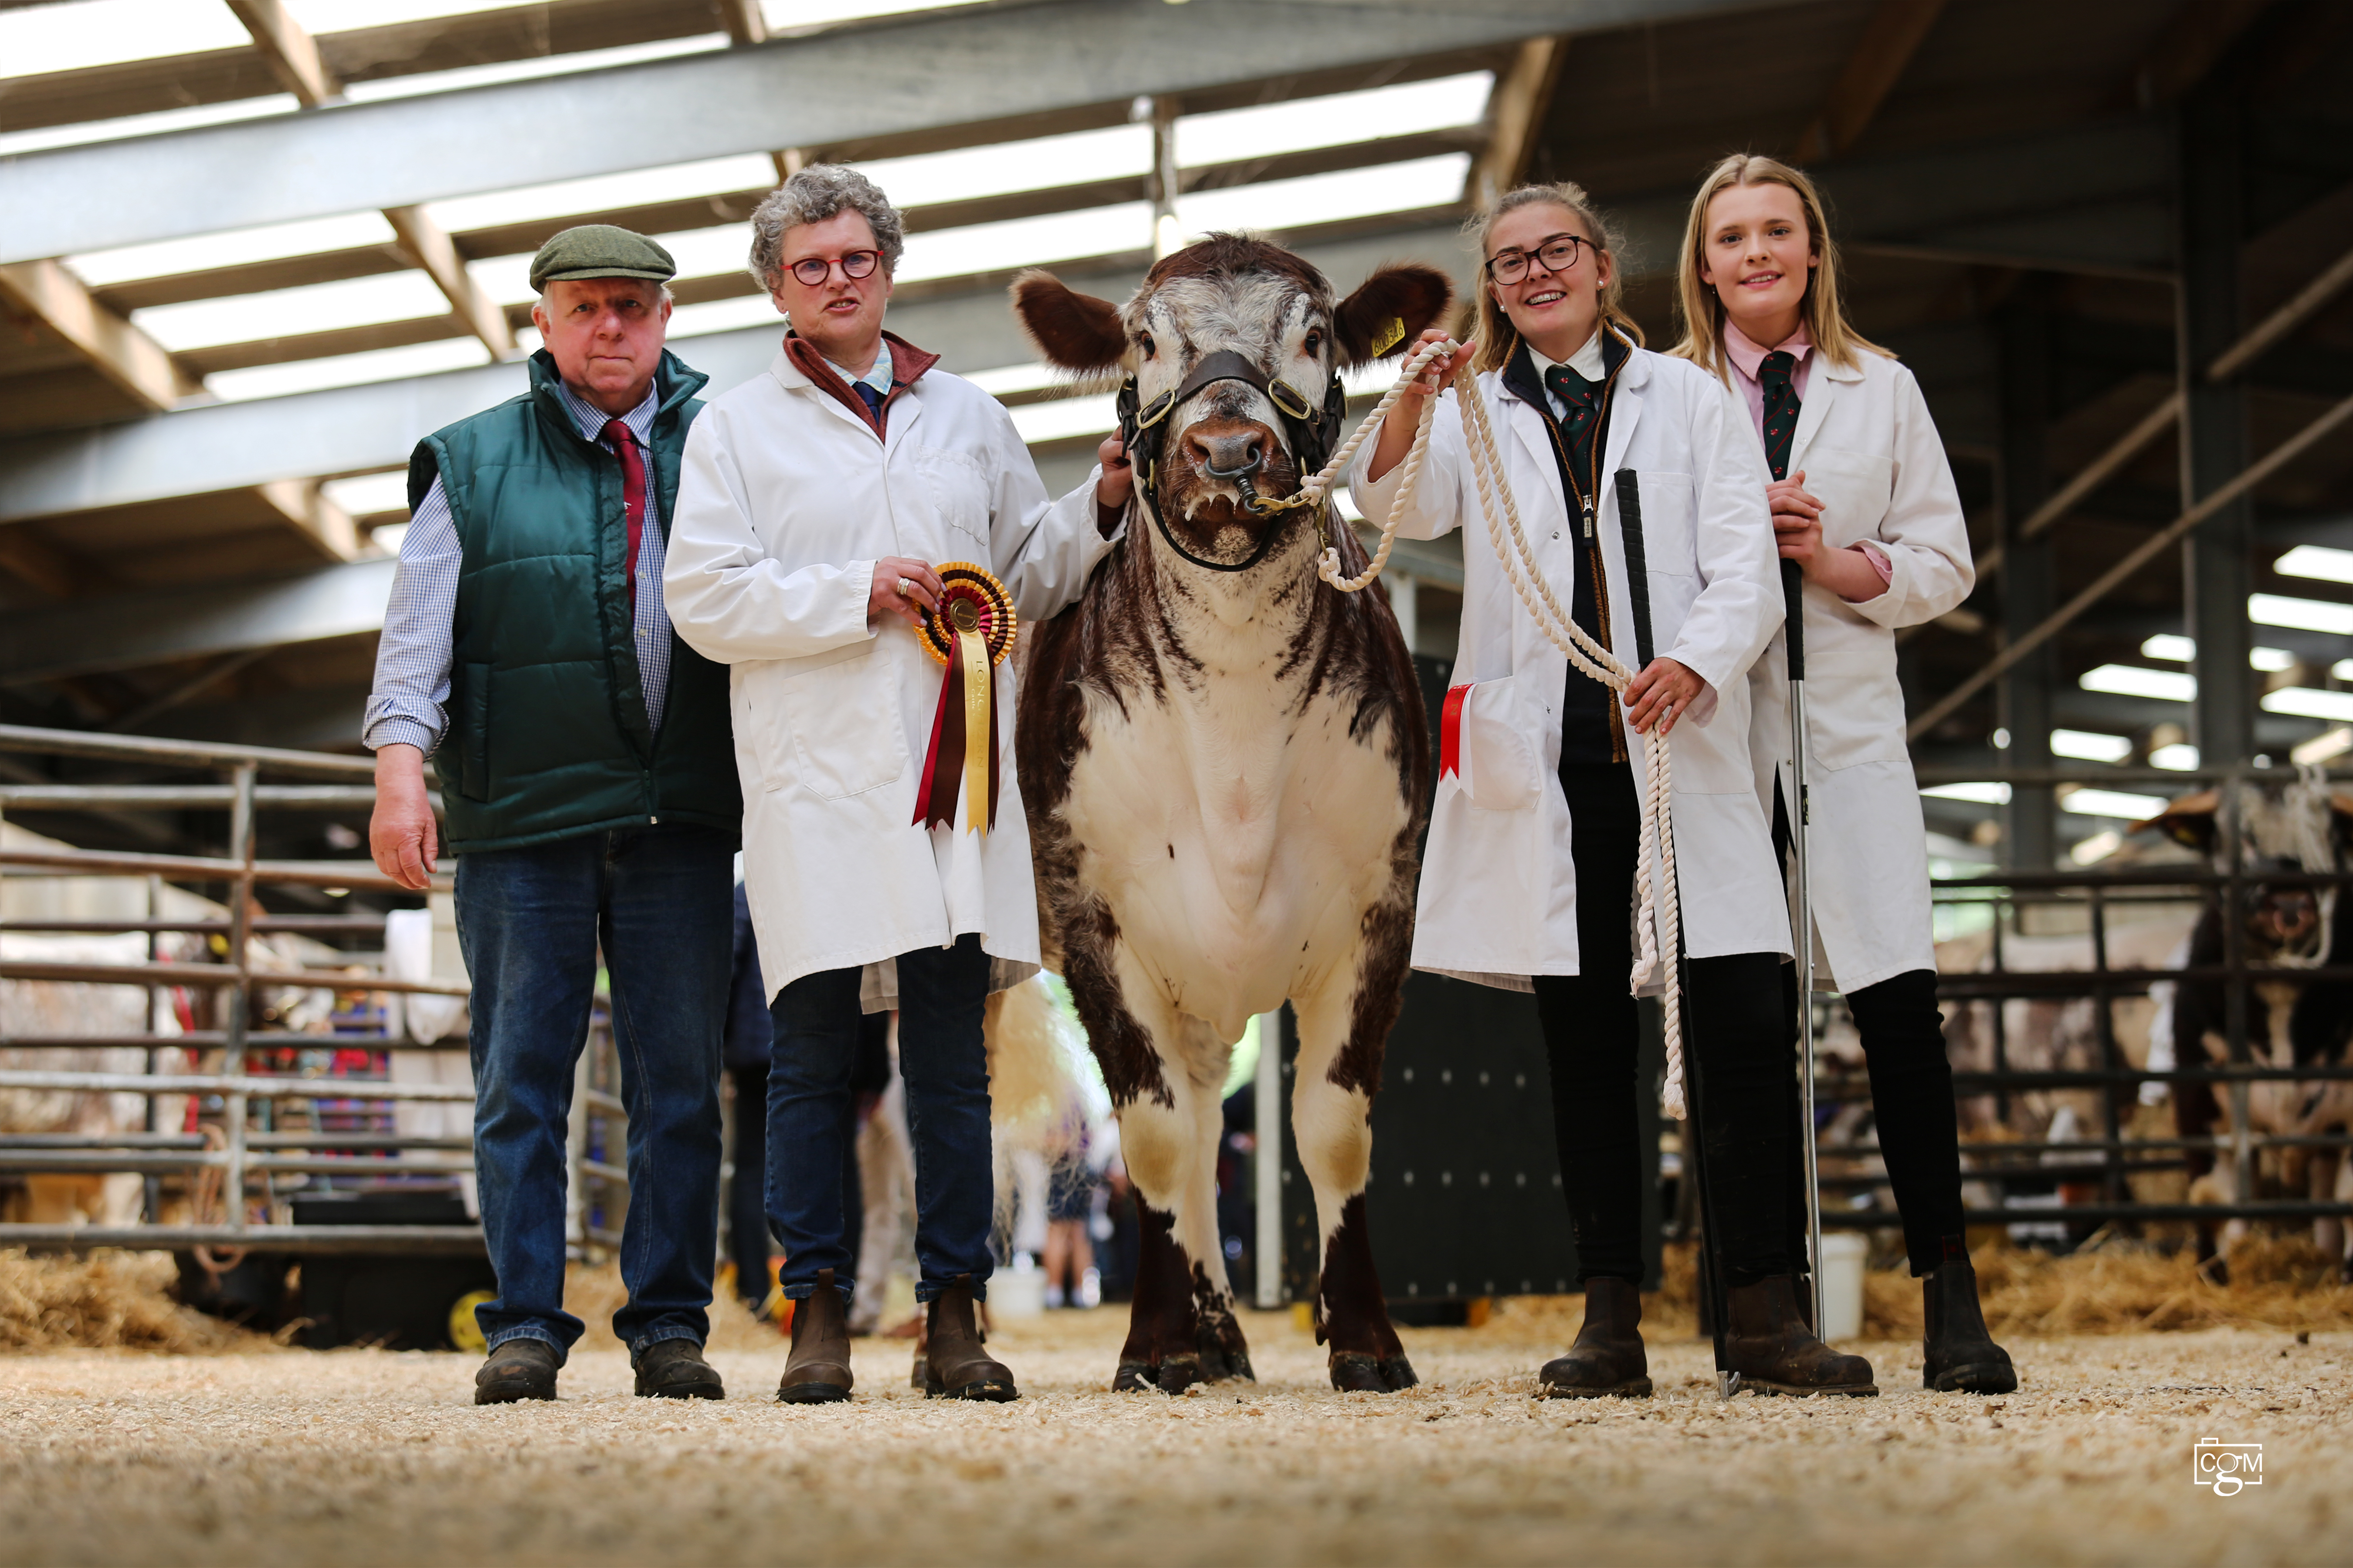 A cow in a market with four people alongside and a winners rosette